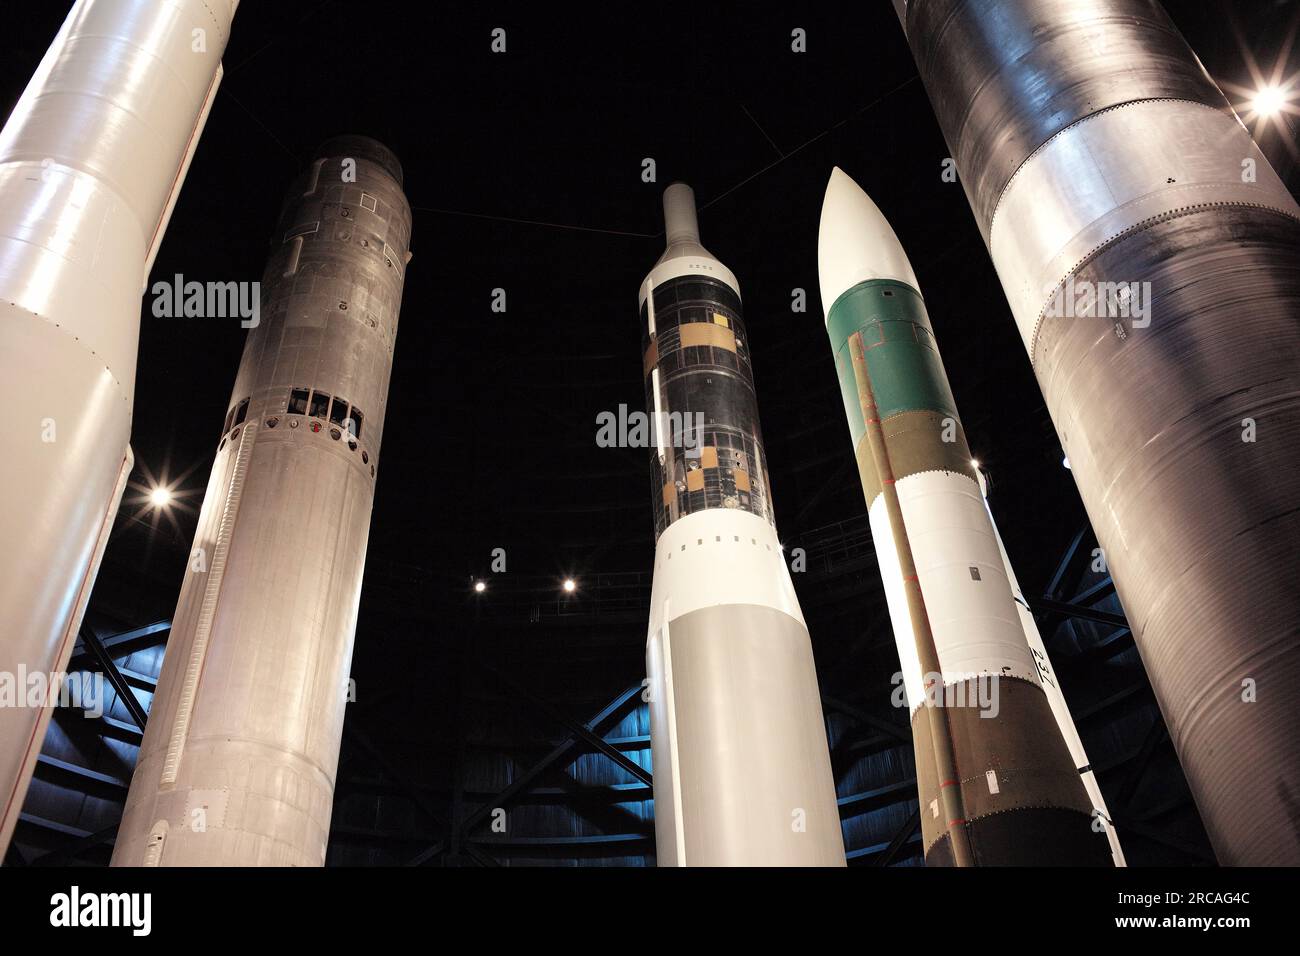 US Missiles on display at the National Museum of the U.S. Air Force at Wright-Patterson Air Force Base near Dayton Ohio. Stock Photo